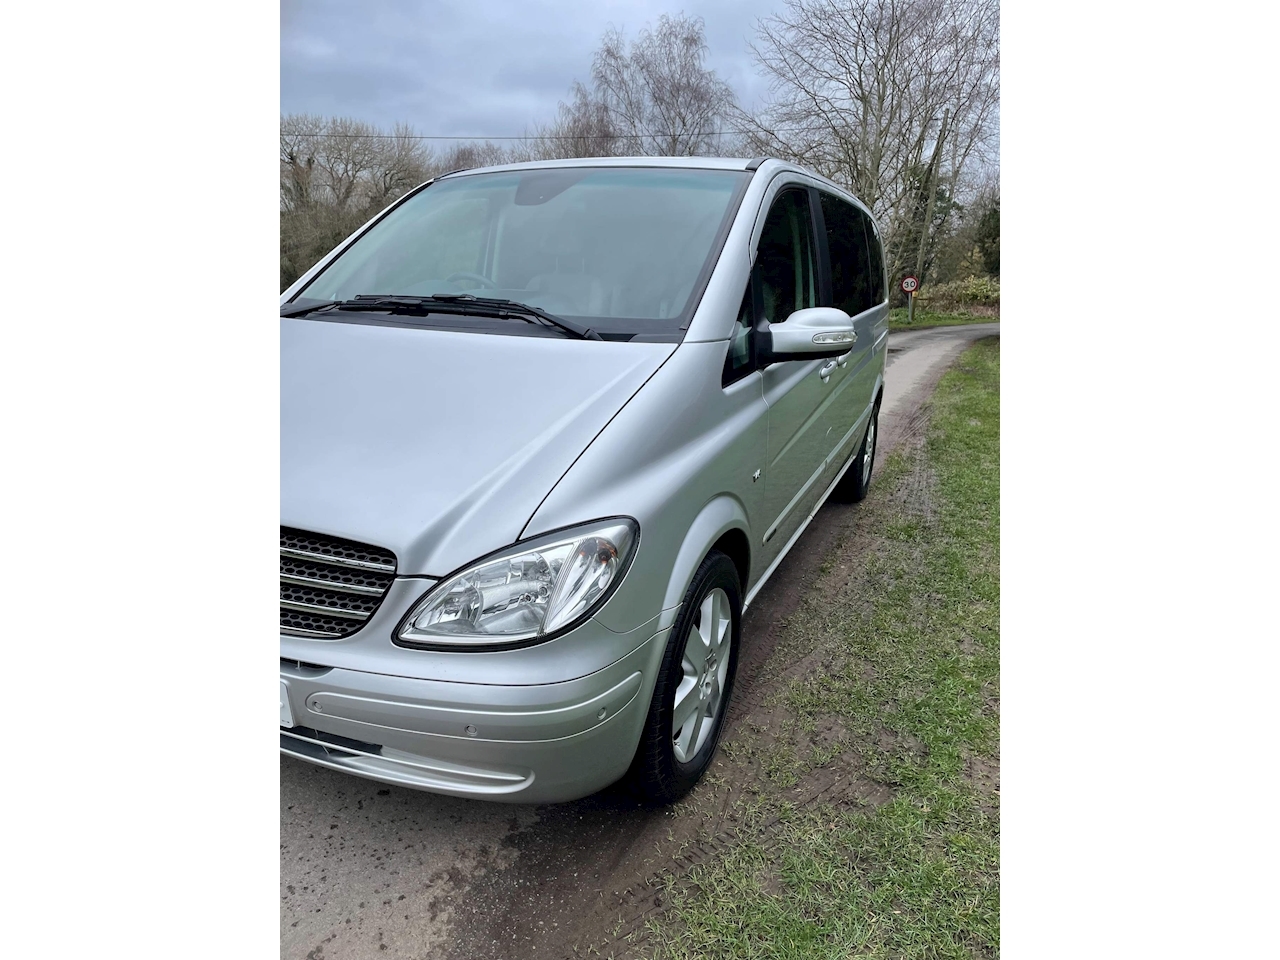 Used 2008 Mercedes-Benz Viano V350 3.5 V6 SPECIAL X-CLUSIVE MODEL 6 SEATS  AUTOMATIC SWB For Sale in Hertfordshire (U450)